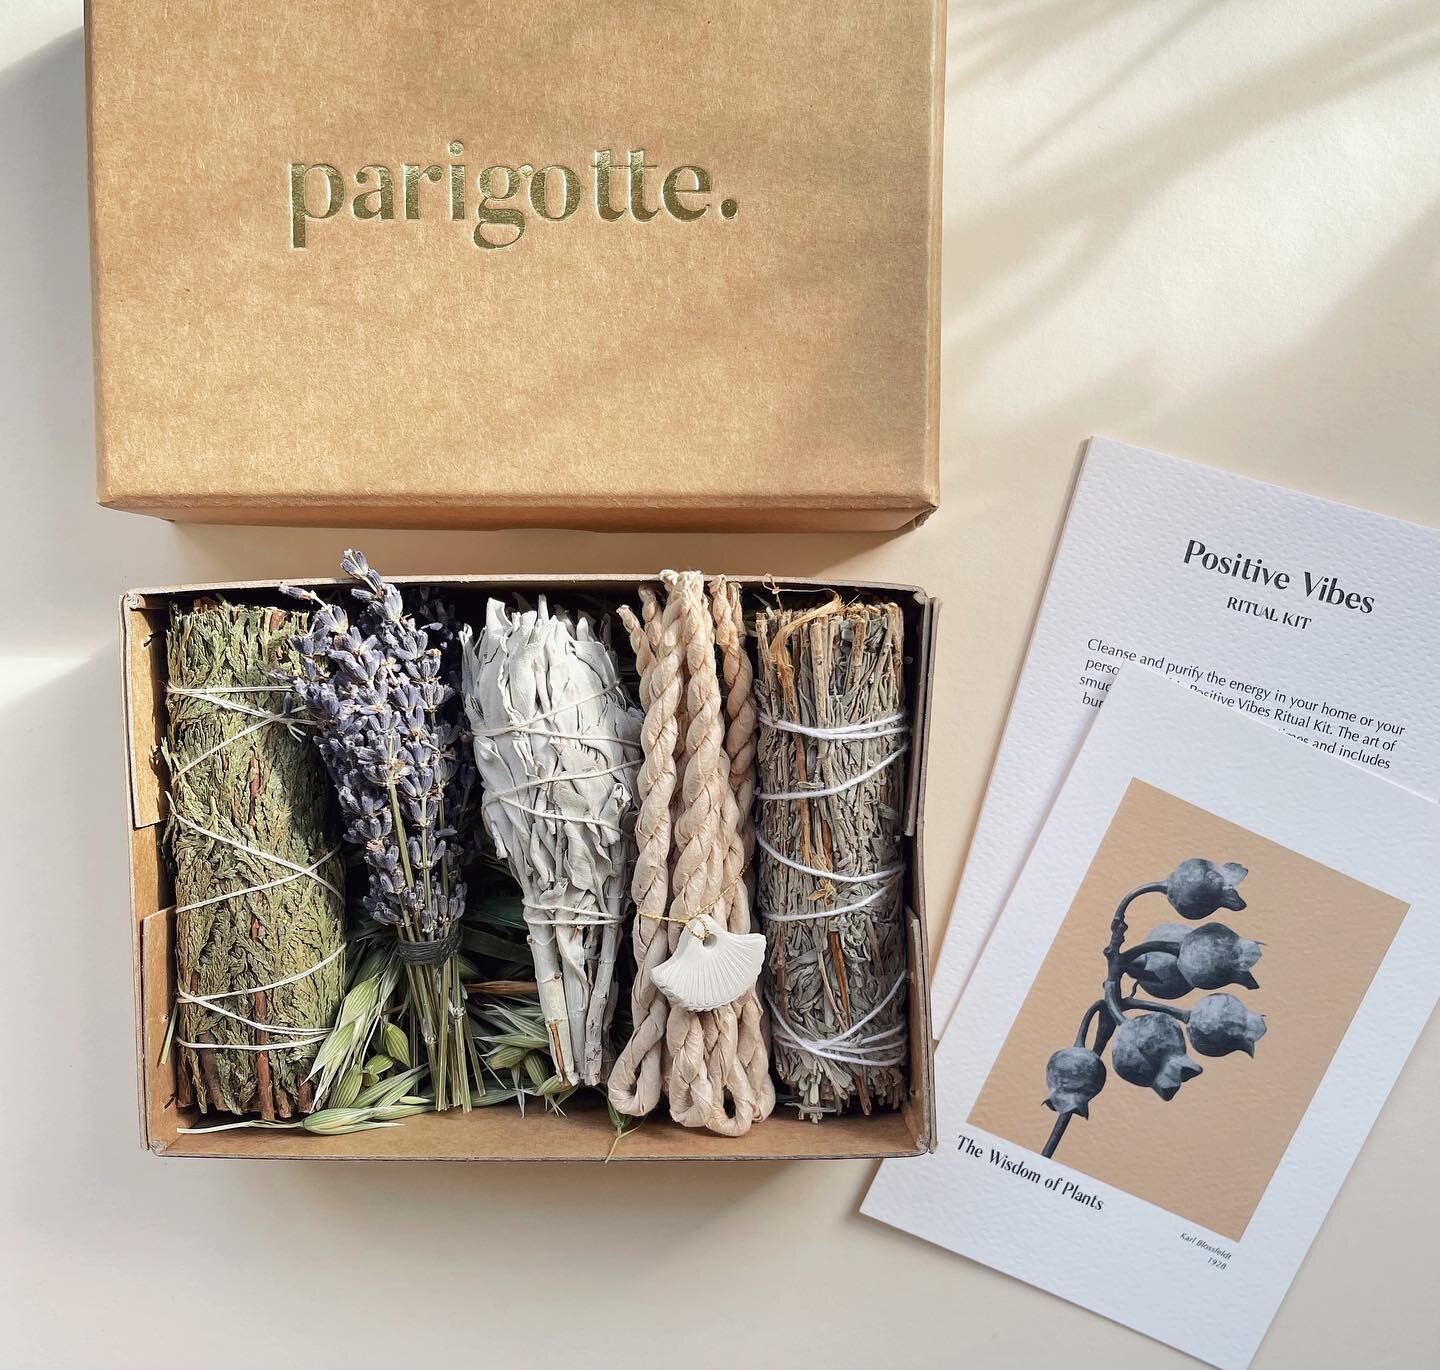 POSITIVE VIBES ✨

Cleanse and purify the energy in your home or your person with this beautiful handmade Positive Vibes Ritual Kit. 
This kit comes with:

- 1 White Sage from California, 100% ethically sourced (approx. 11cm long) - 1 Californian Dese